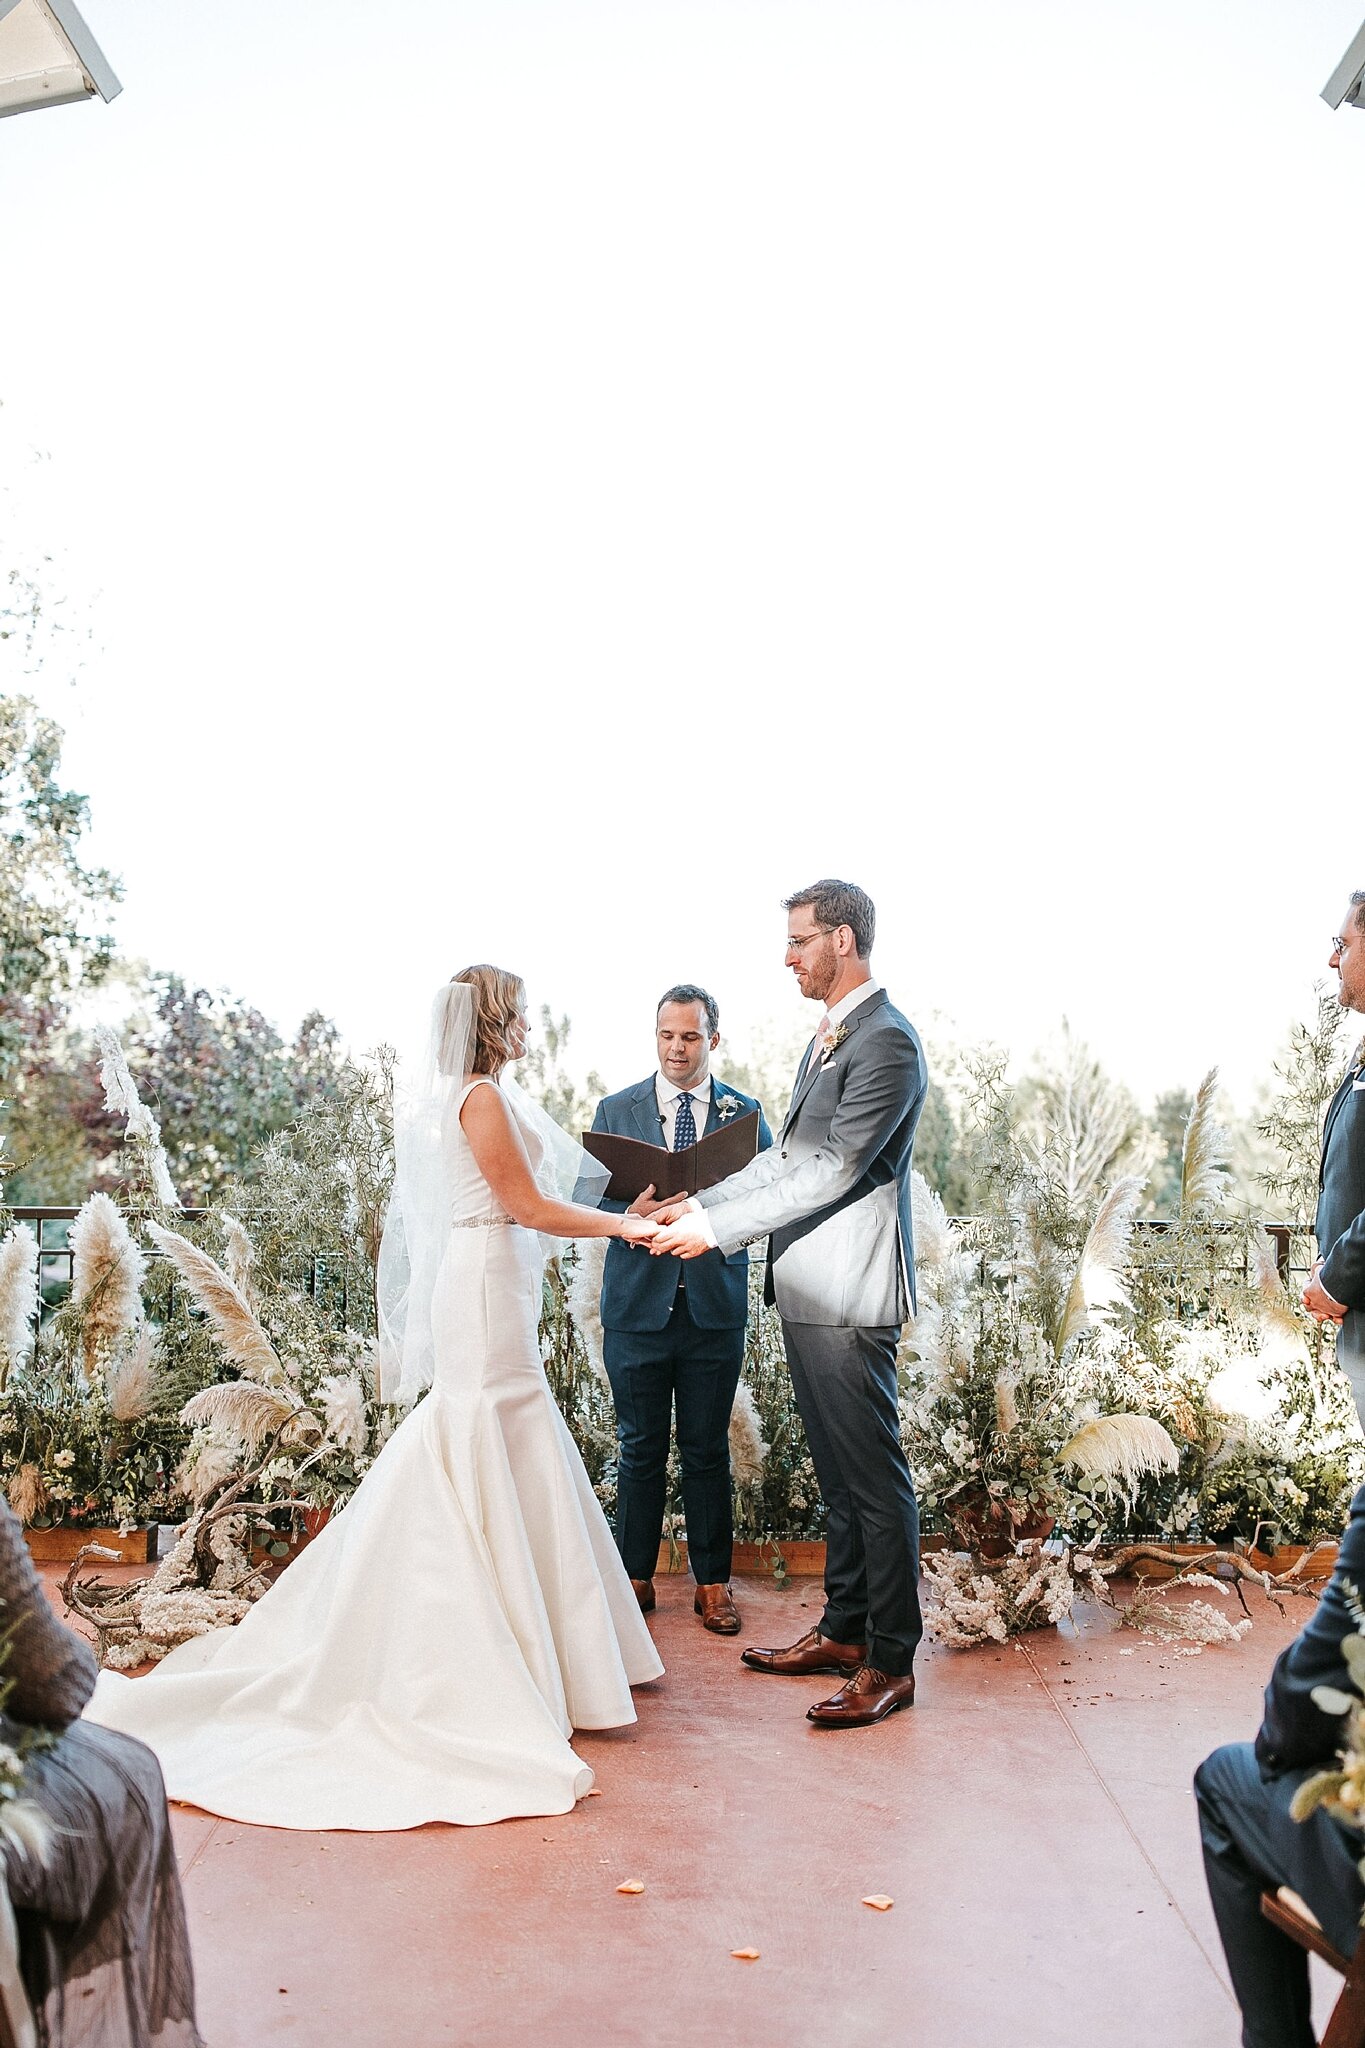 Alicia+lucia+photography+-+albuquerque+wedding+photographer+-+santa+fe+wedding+photography+-+new+mexico+wedding+photographer+-+new+mexico+wedding+-+wedding+gowns+-+trumpet+wedding+gown+-+bridal+gowns_0018.jpg